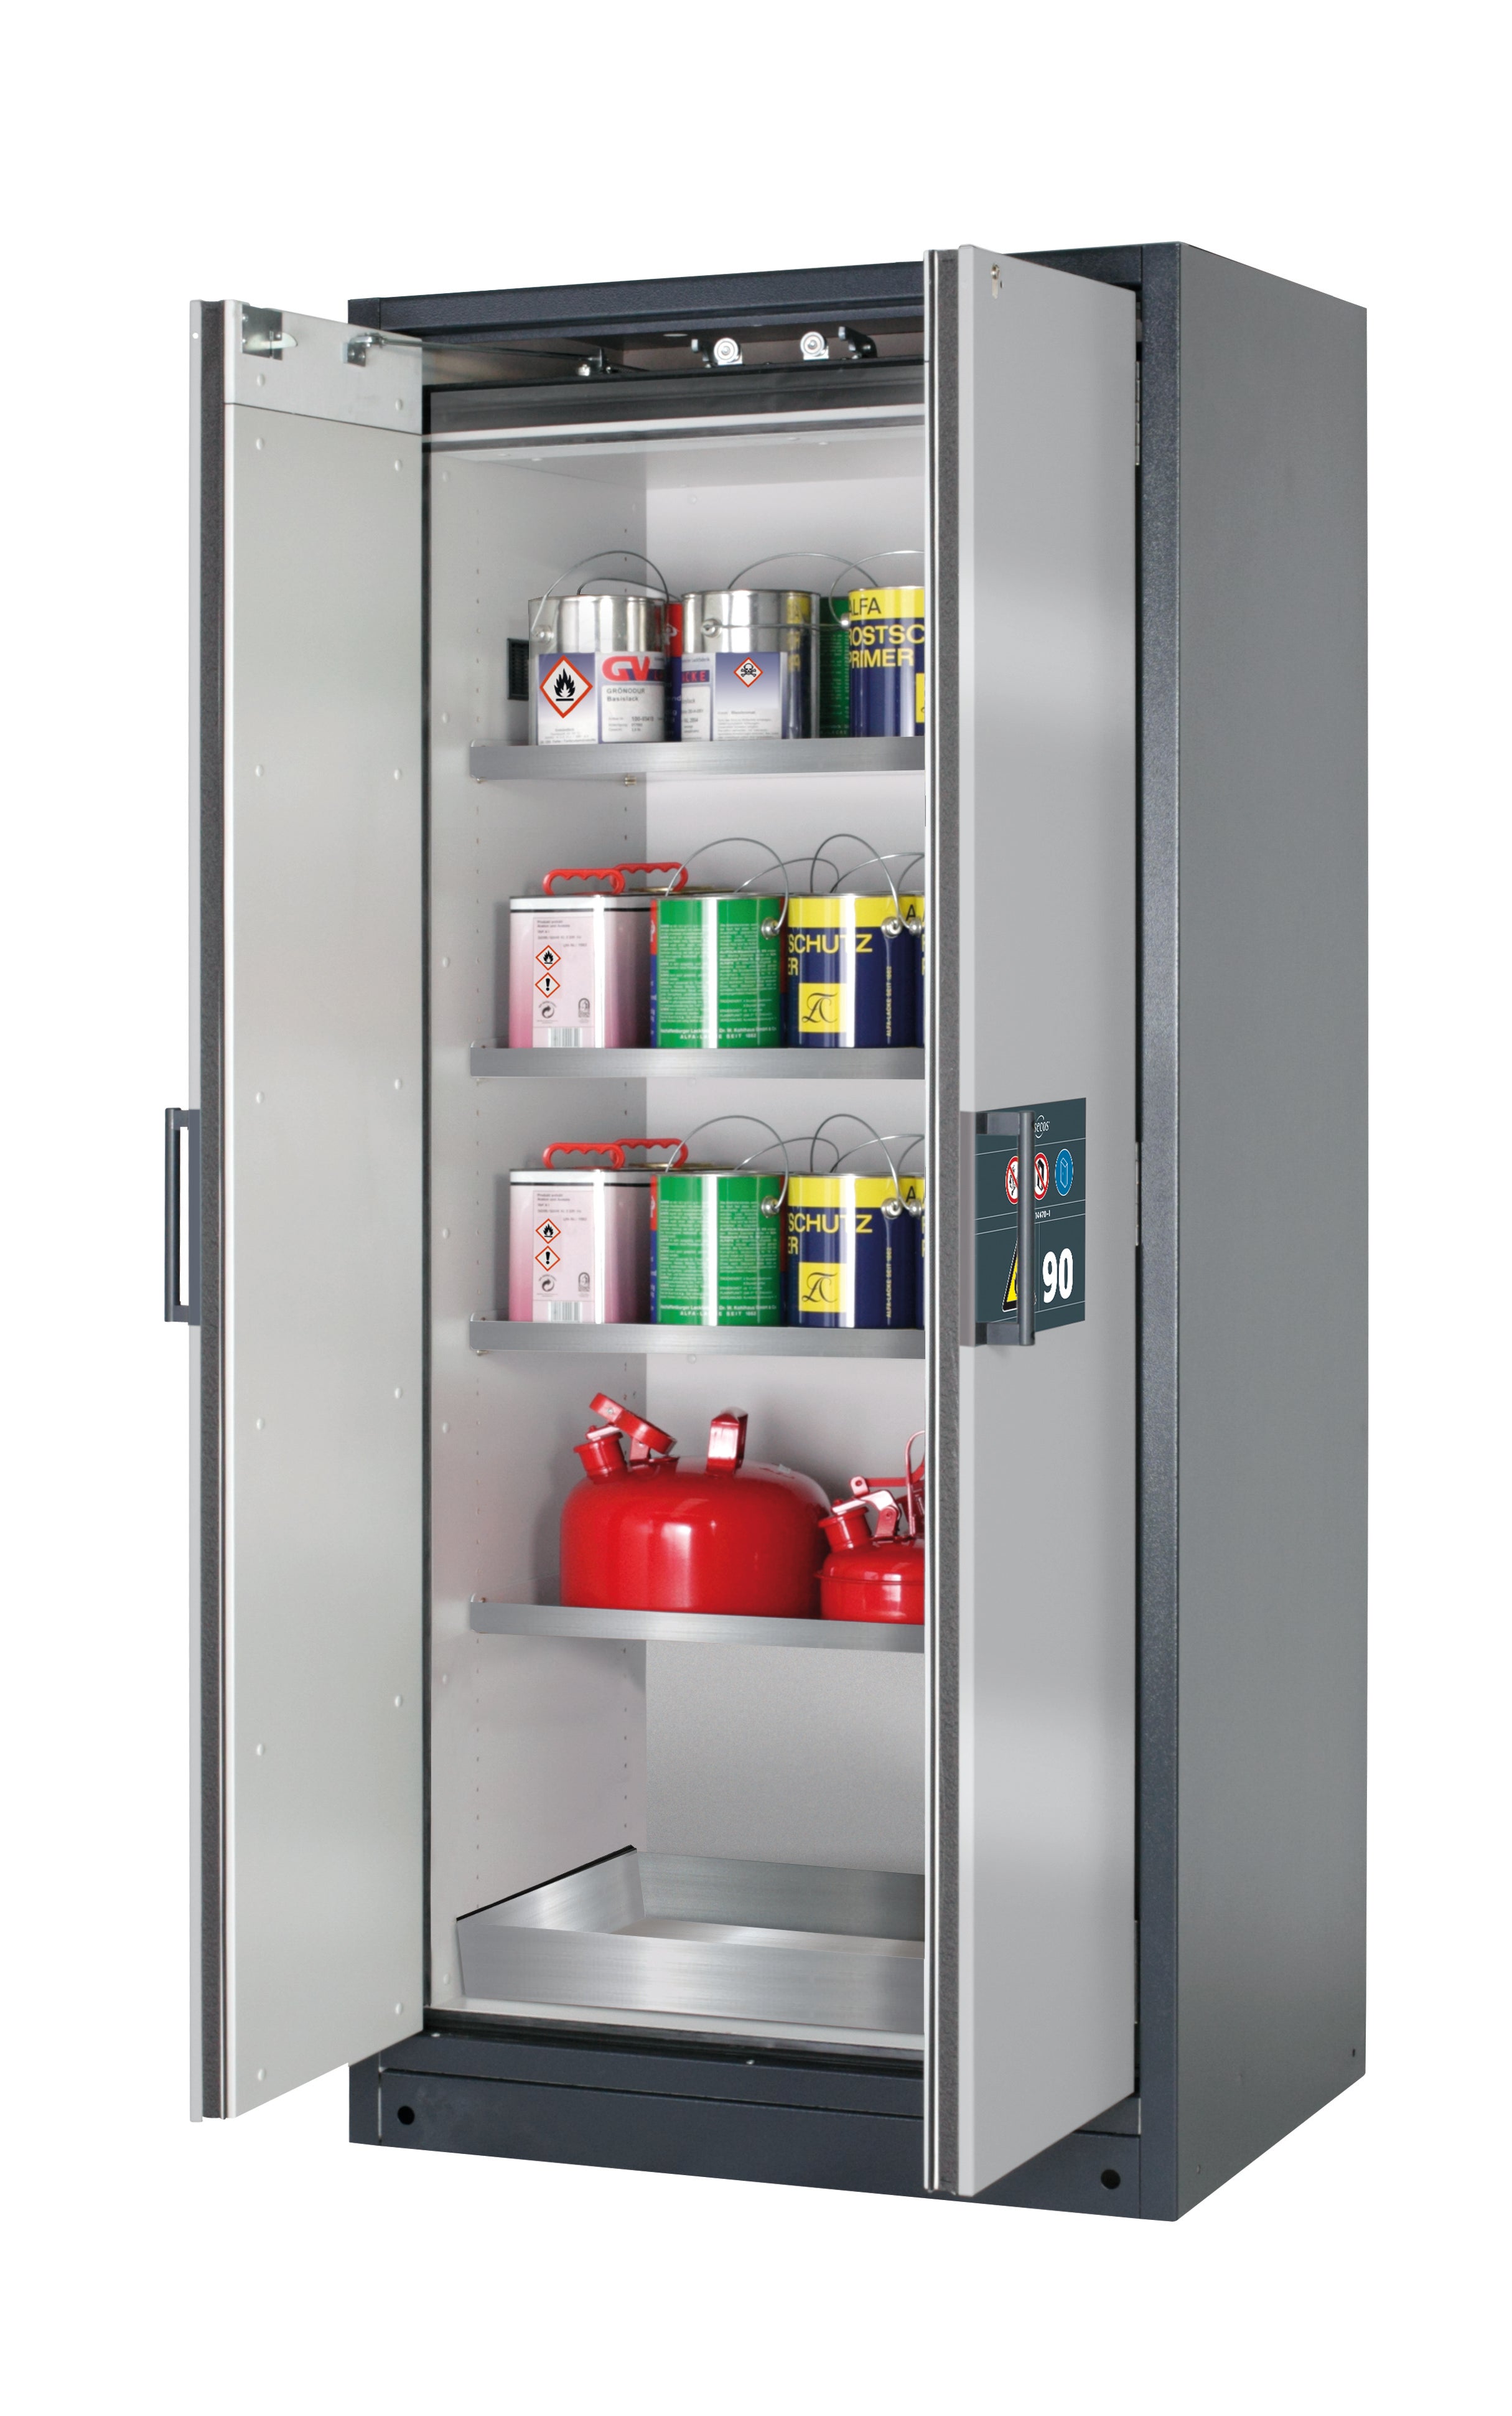 Type 90 safety storage cabinet Q-CLASSIC-90 model Q90.195.090 in asecos silver with 4x shelf standard (stainless steel 1.4301),